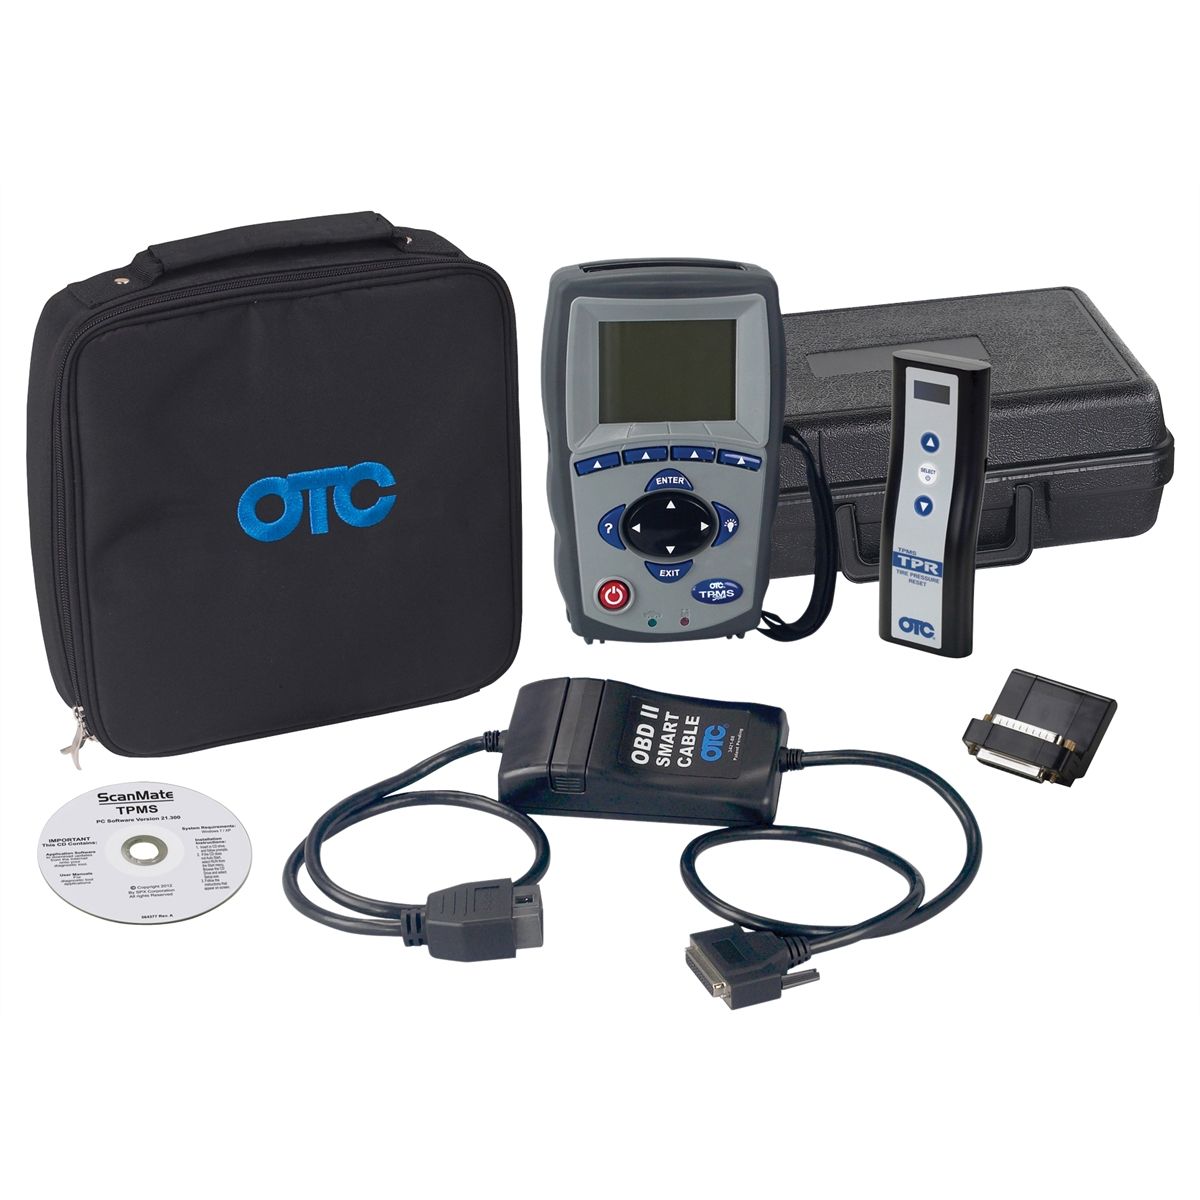 ATEQ QUICKSET TPMS TOOL SCANNER PROGRAMMING RELEARN LEARNS ACTIVATION RESET SCAN